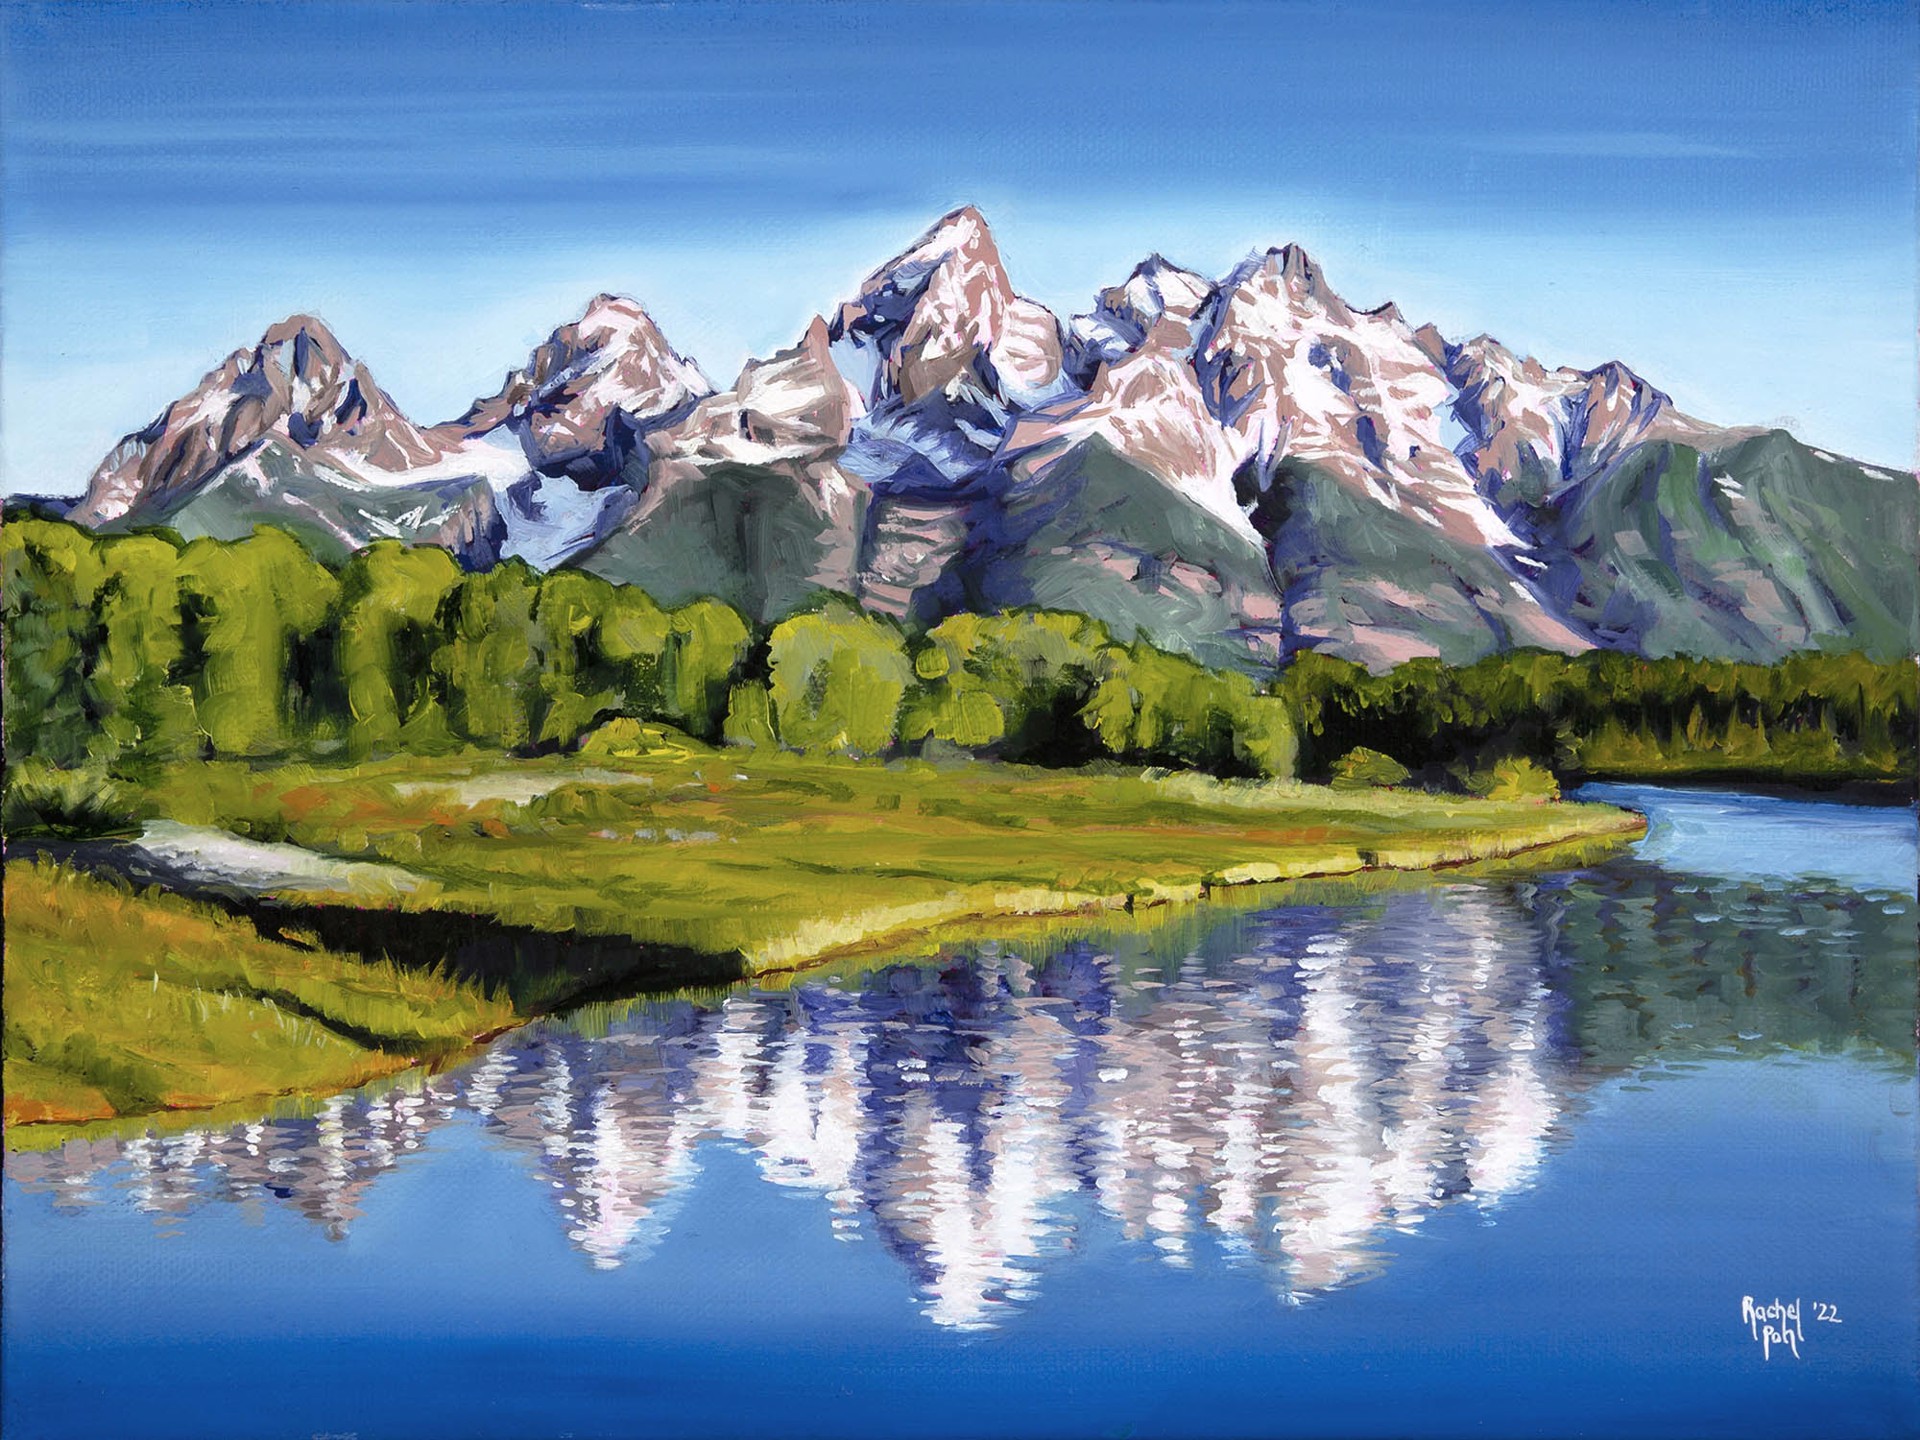 Mountain Landscape Of The Tetons Reflecting In Water Summer Scene